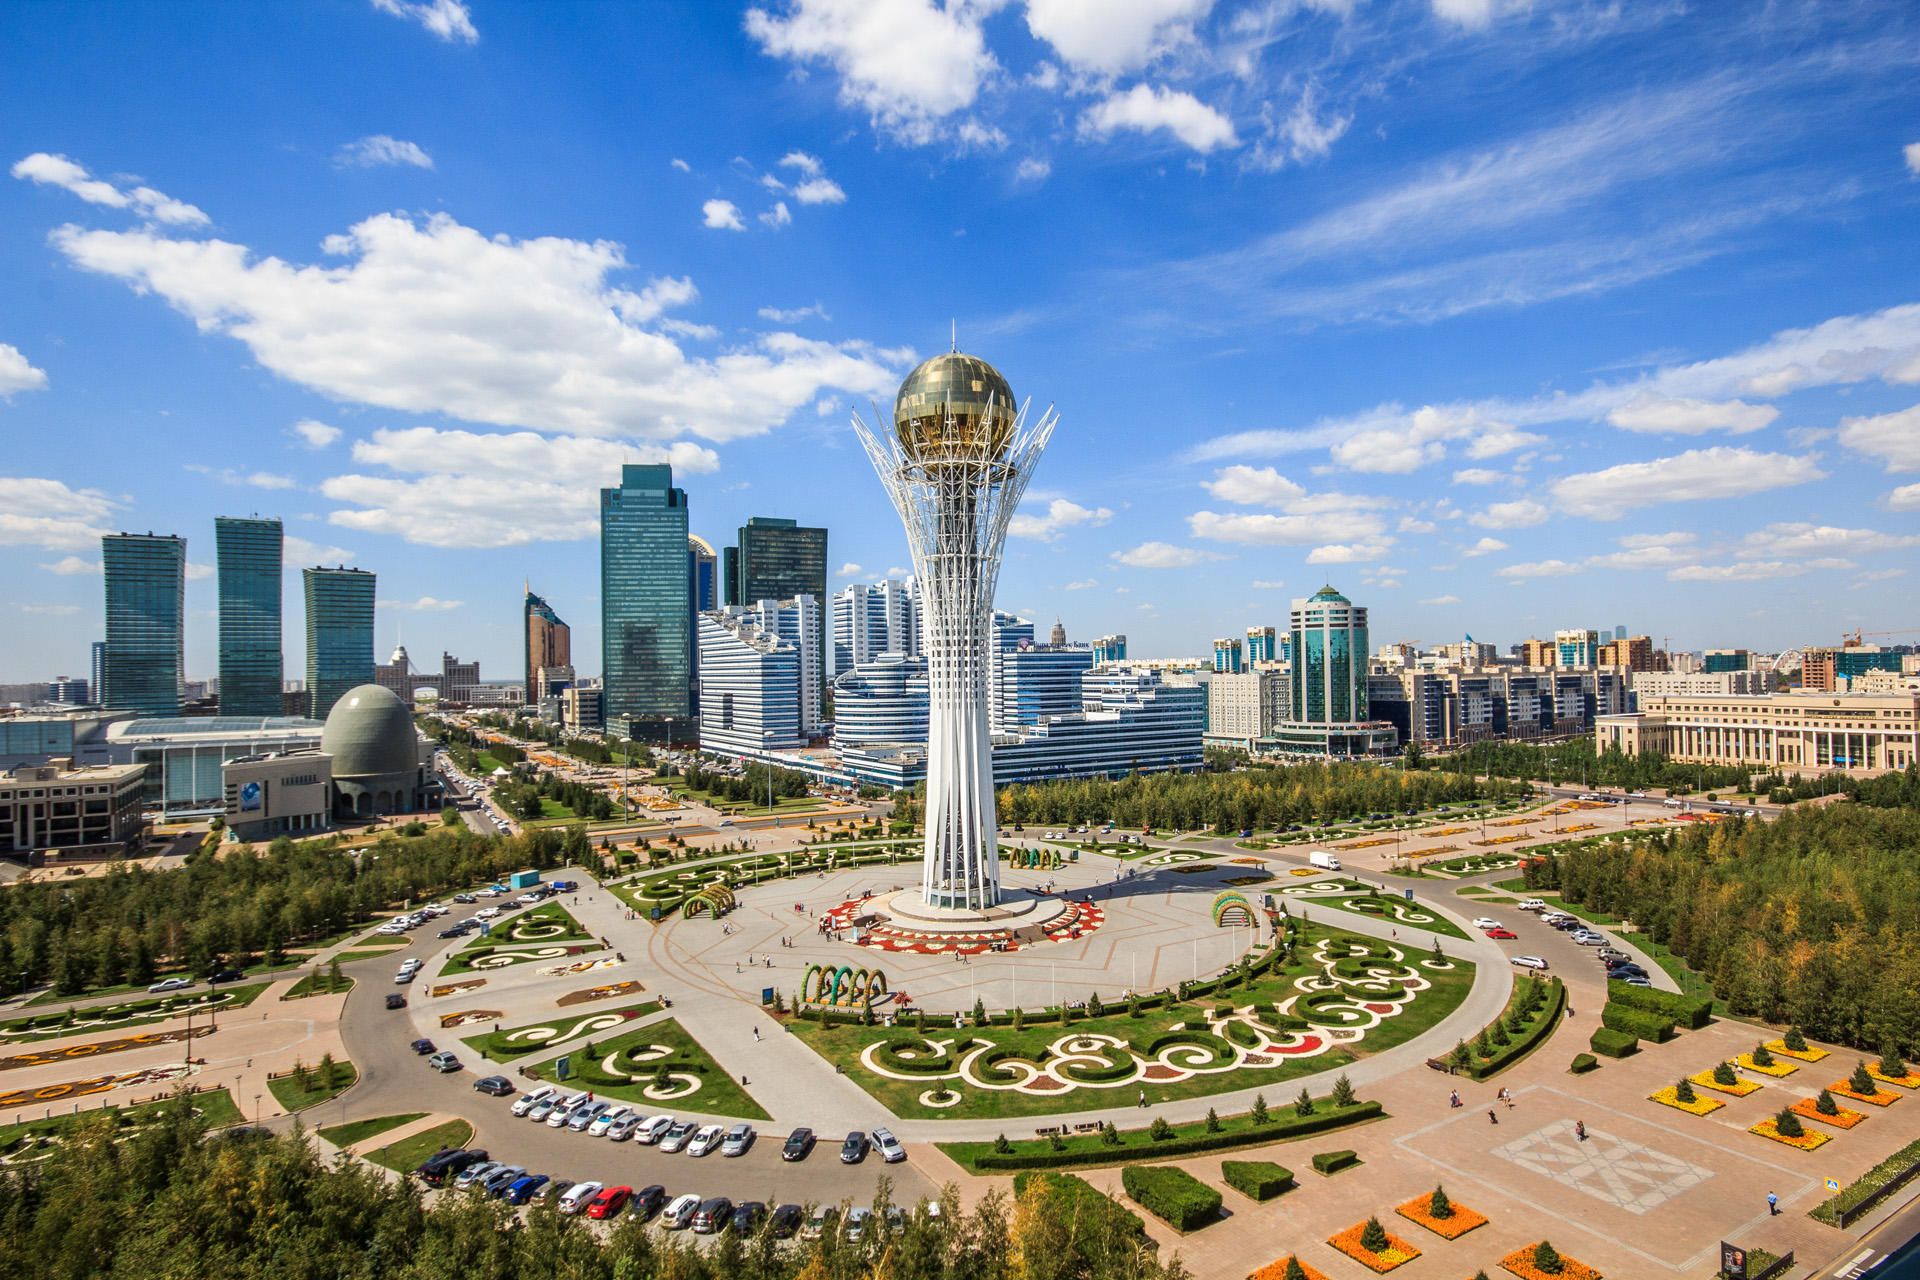 A dinner was held in honor of the heads of state in Astana